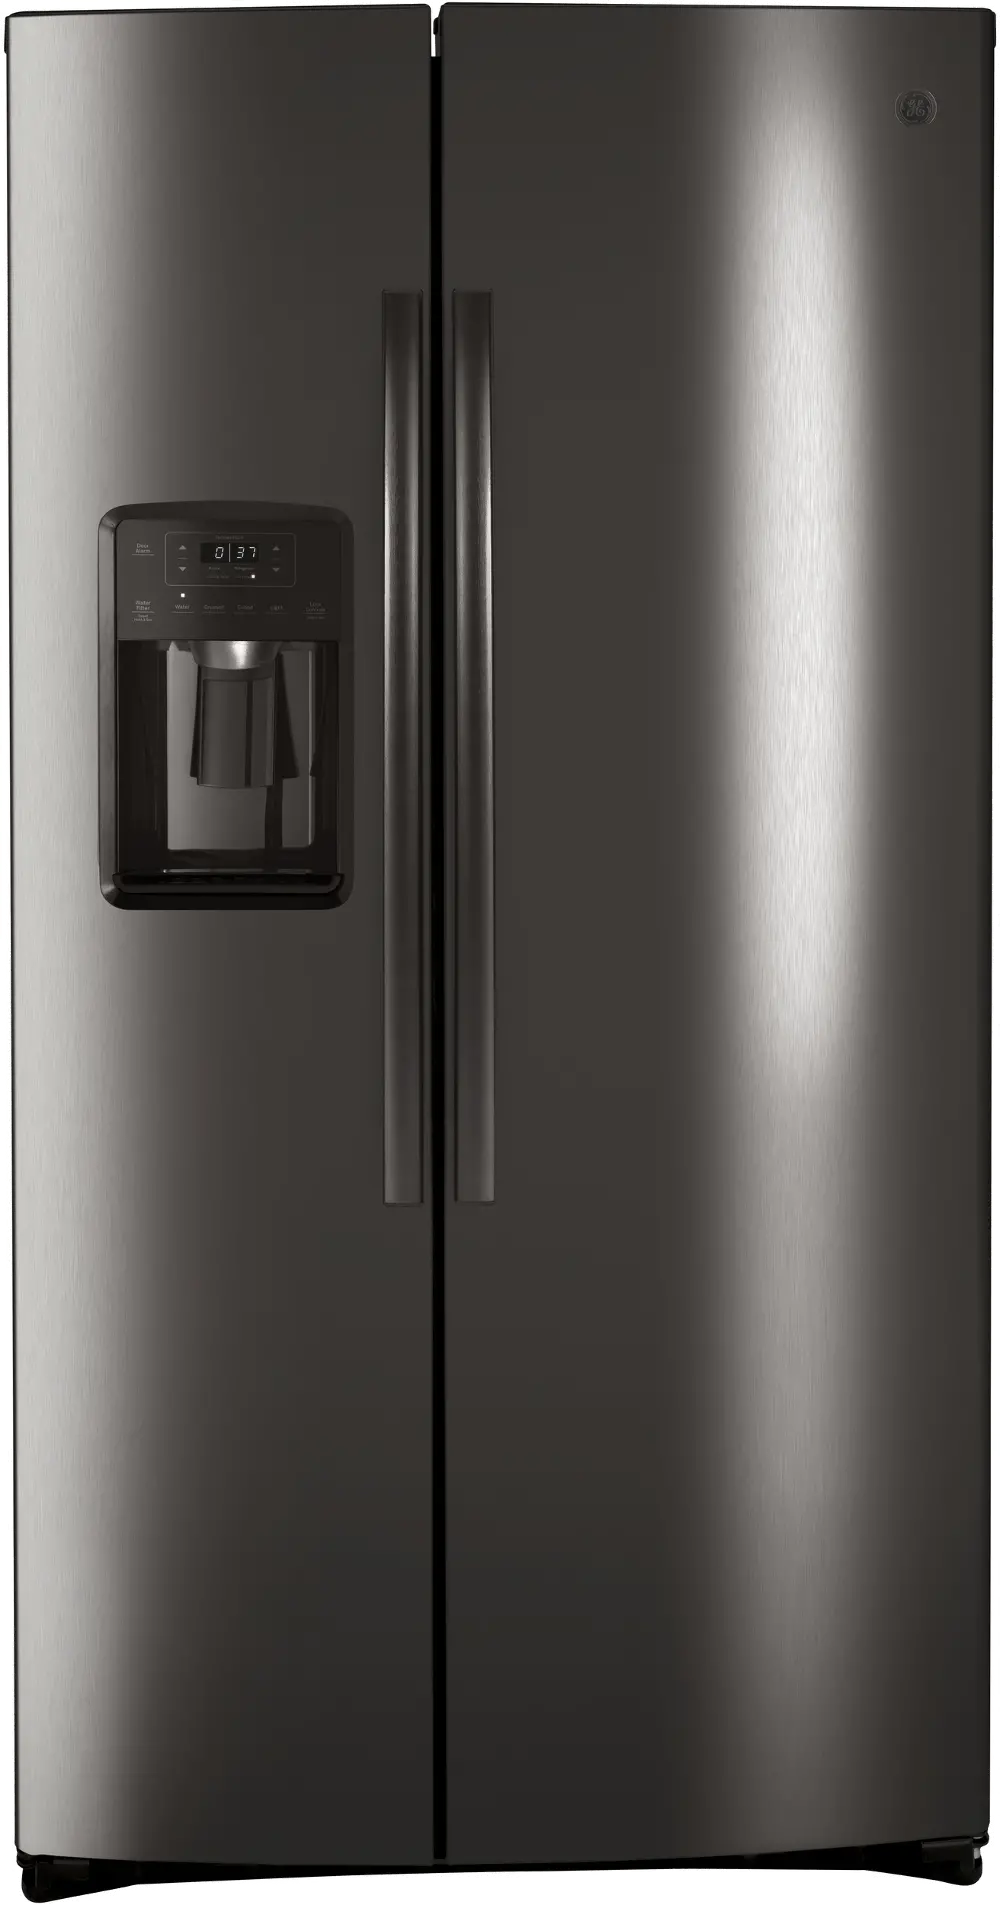 GSS25IBNTS GE 25.1 cu ft Side by Side Refrigerator - Black Stainless Steel-1